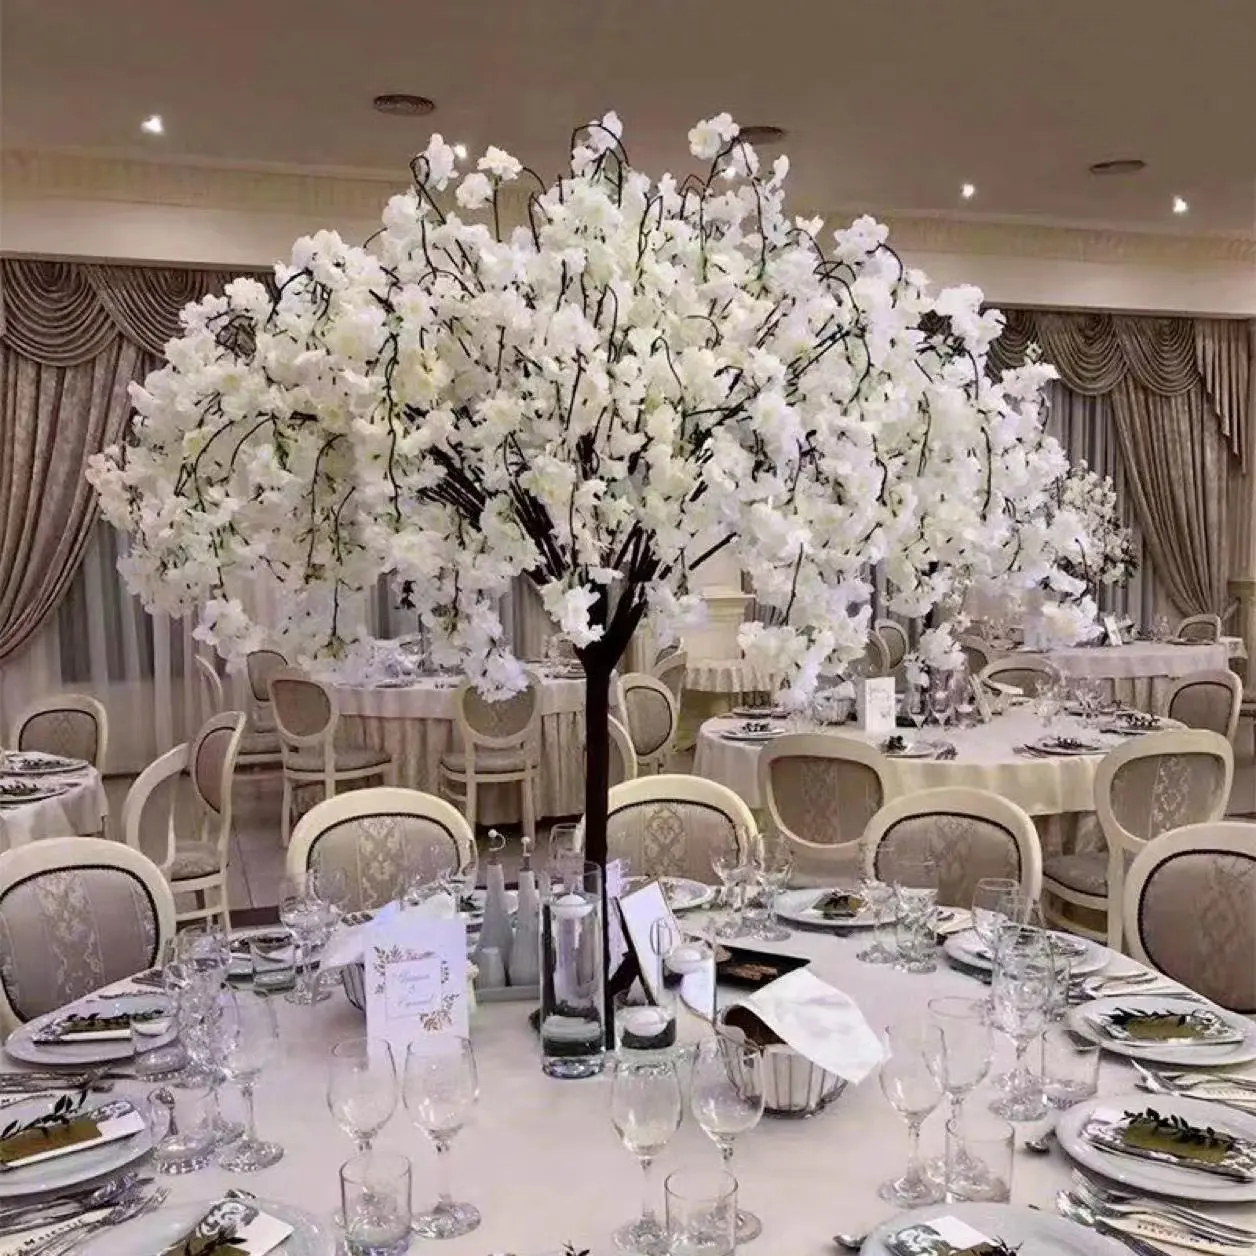 Y-Q062 Wholesale White Cherry Blossom Artificial Tree Cheery Blossom Tree Wedding Table Centerpiece Trees Wedding Decoration